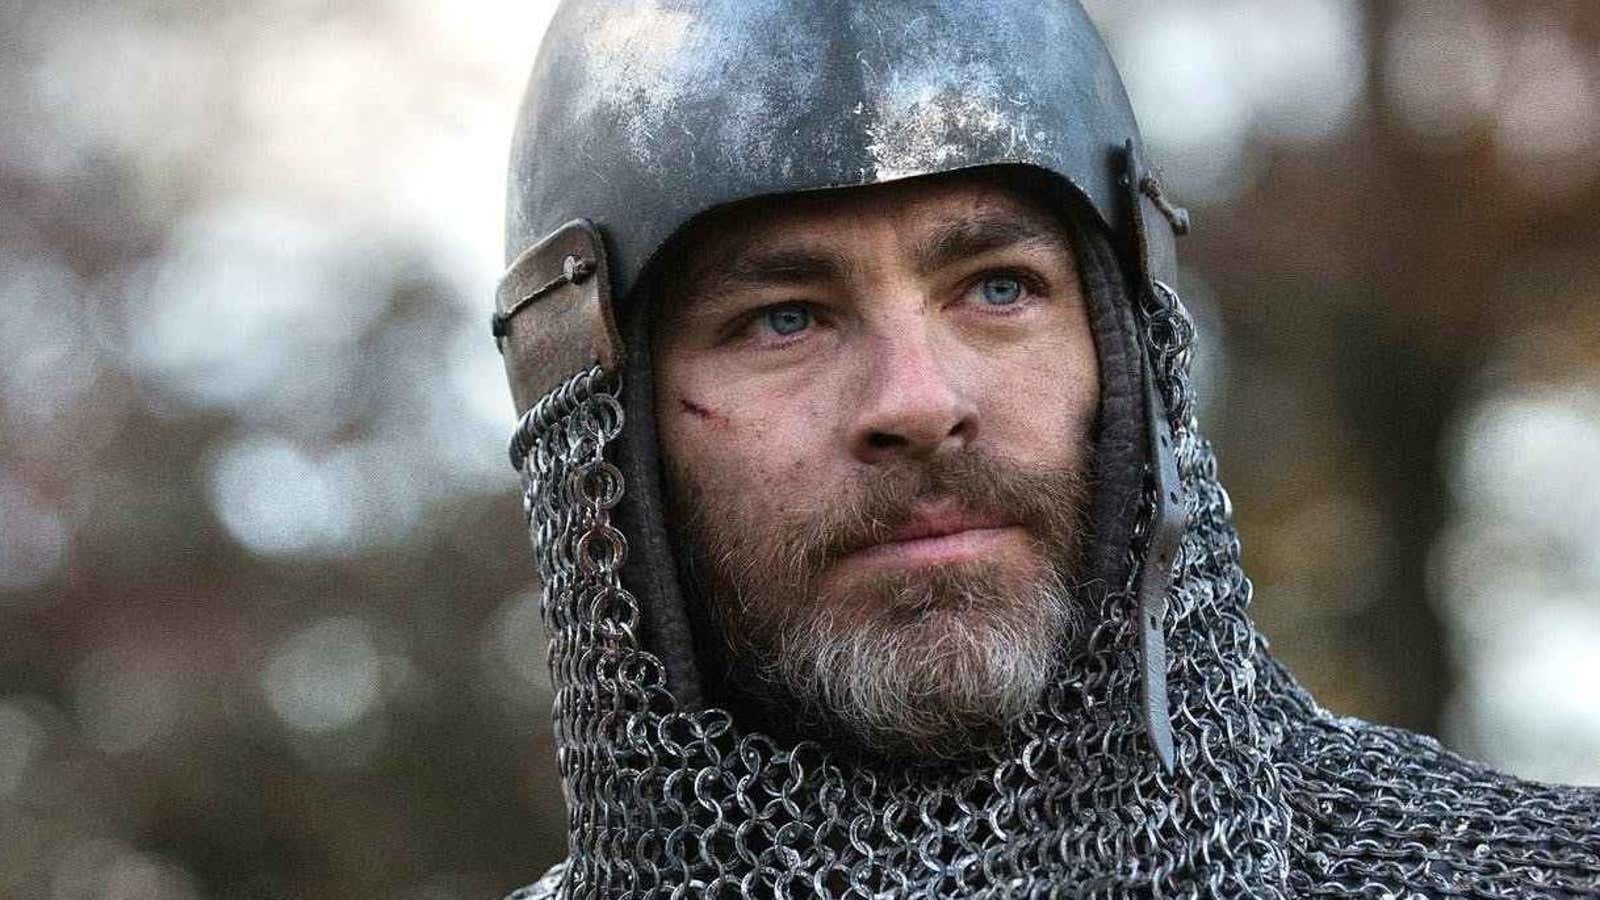 Netflix is trying to be something of an “Outlaw King” itself.